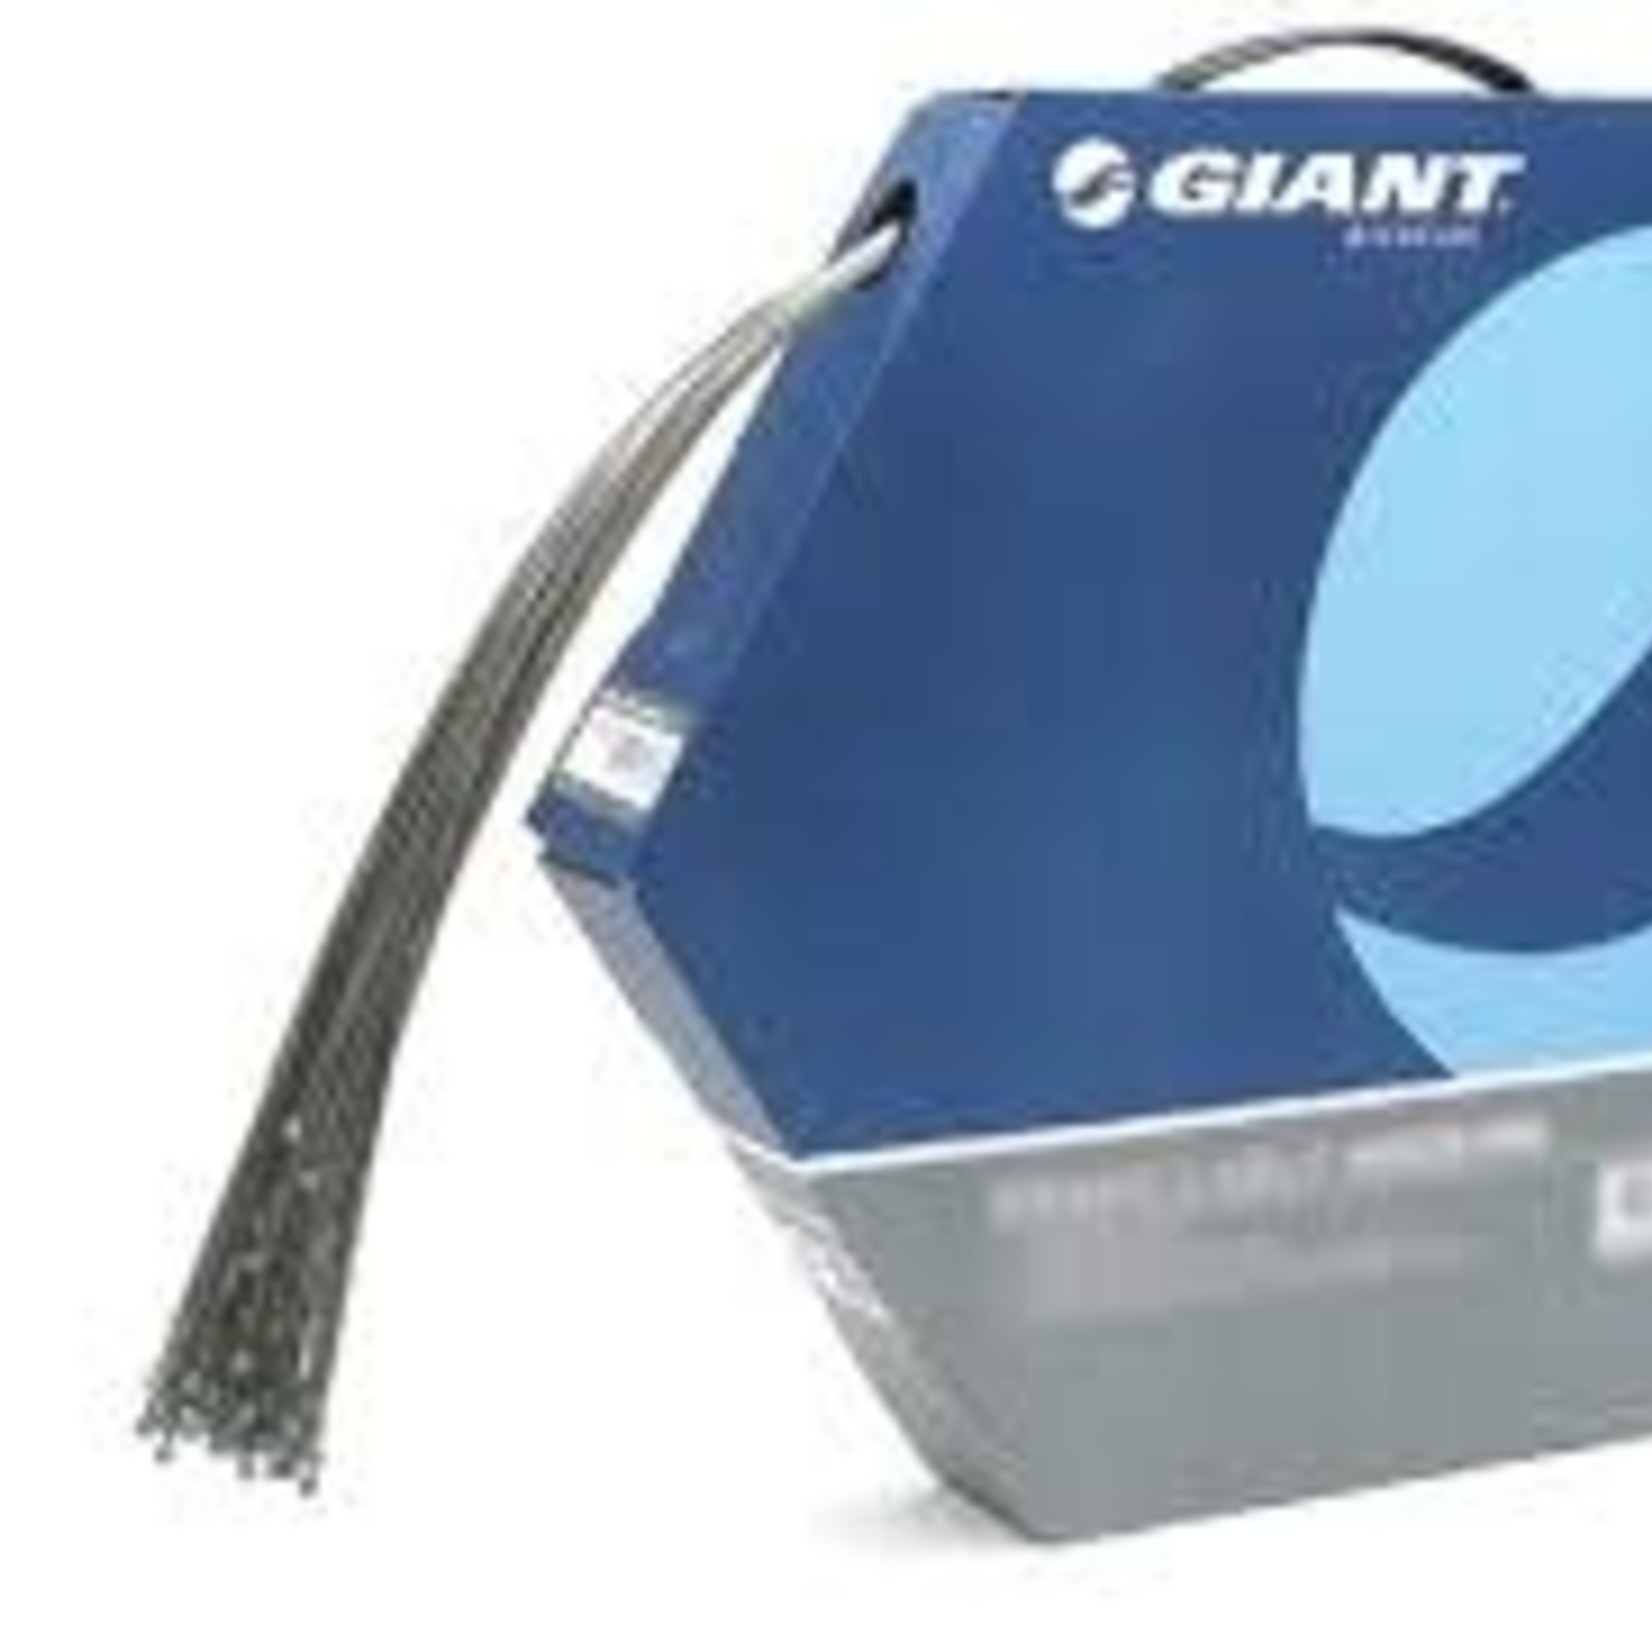 Giant Cable Derailleur Stainless Jagwire Box of 100